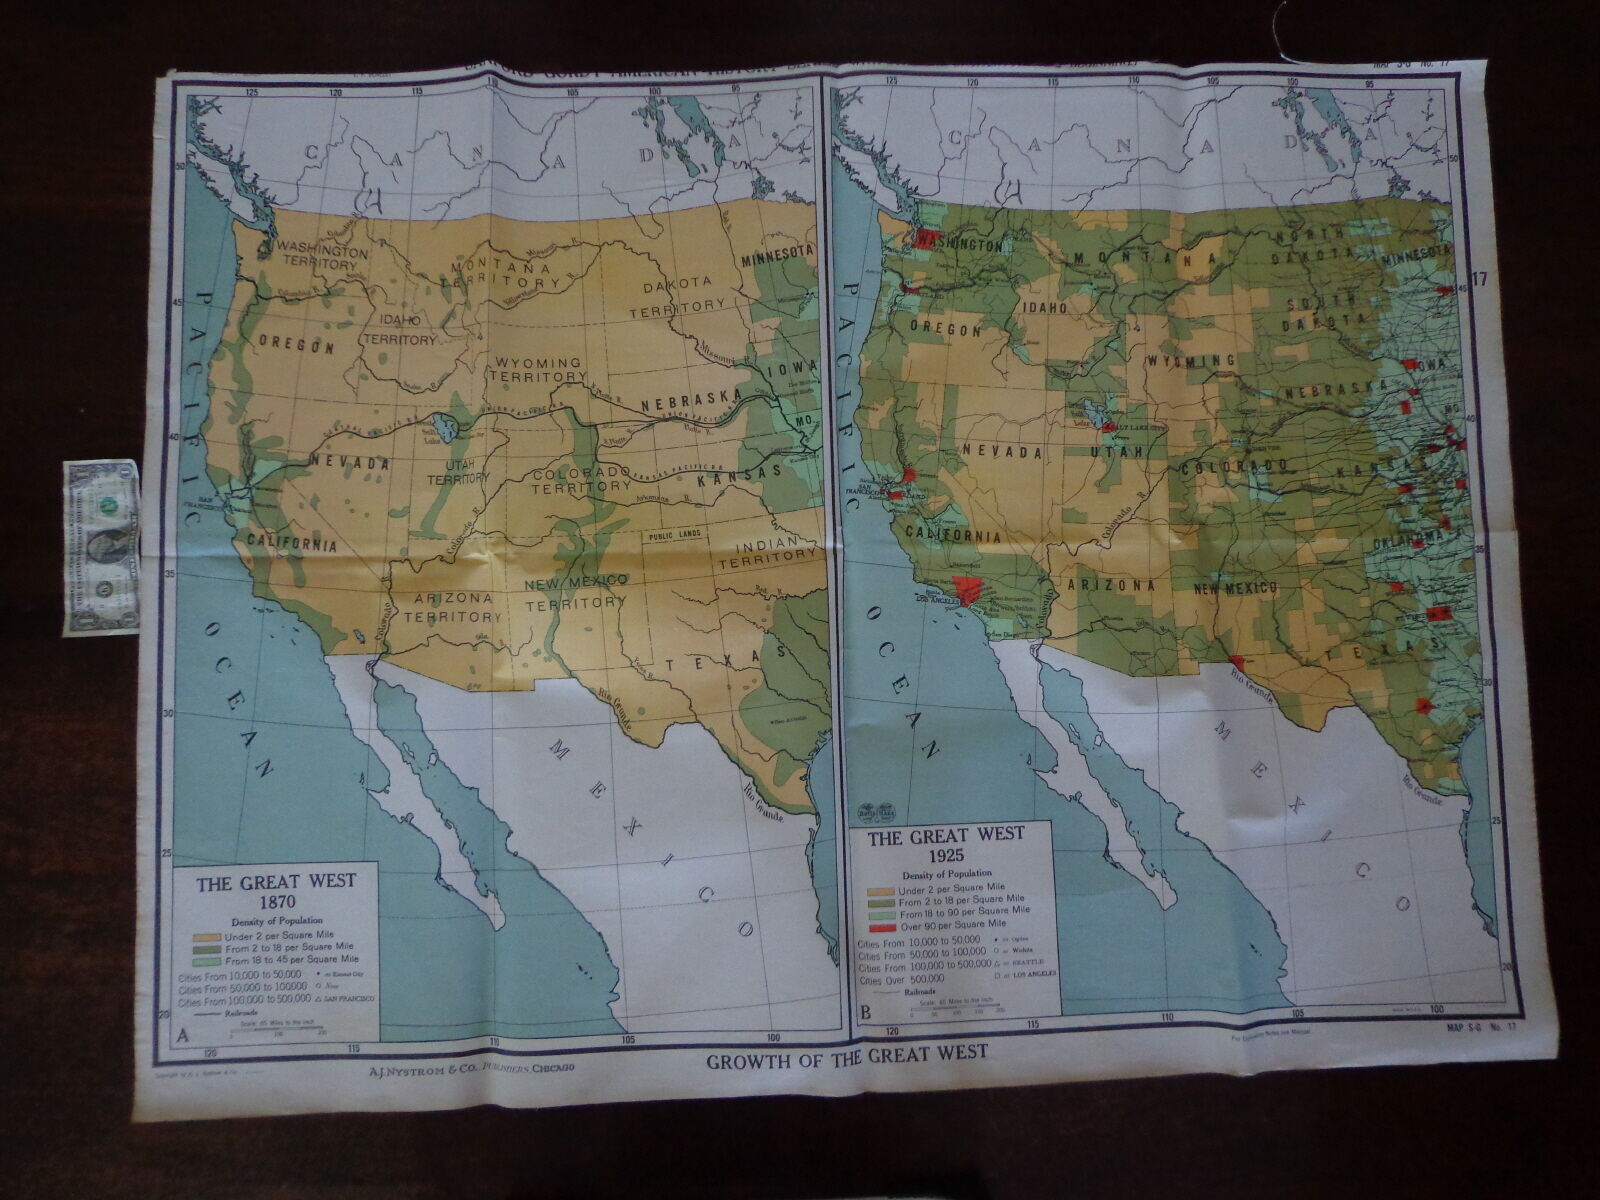 Vintage Large A J Nystrom Educational School Wall Map Growth Great West 3' By 4'